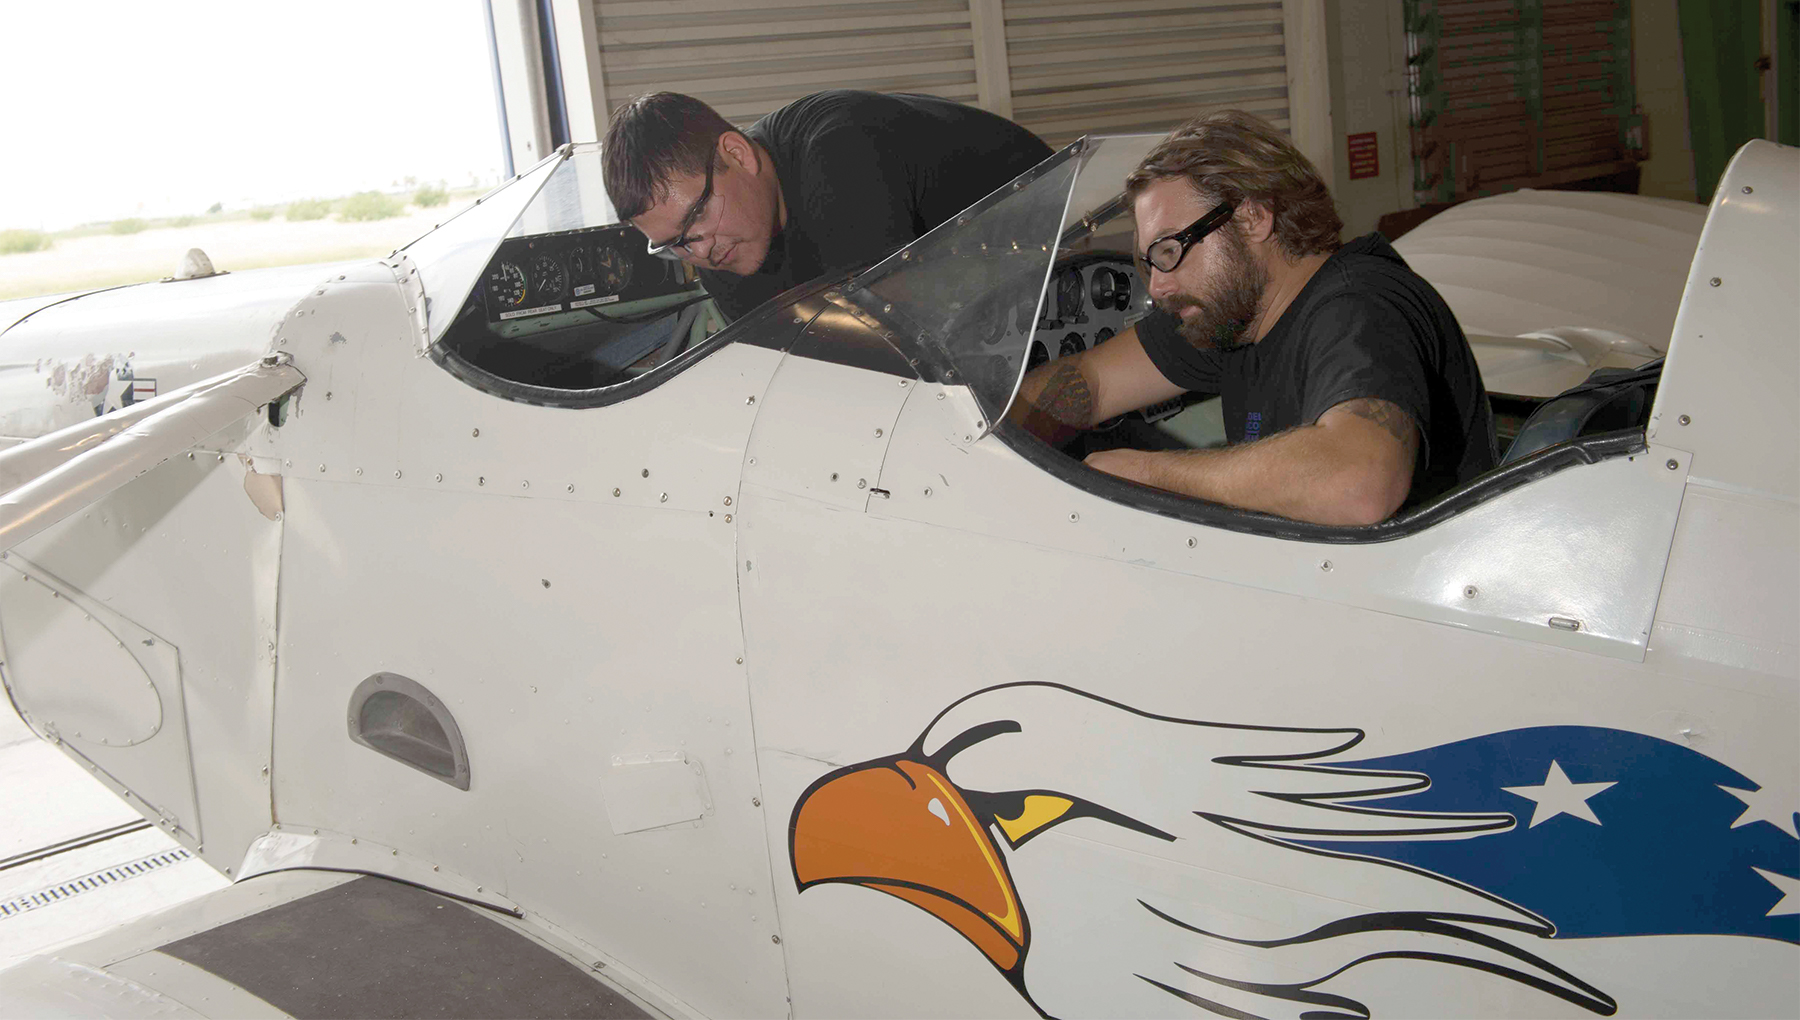 Two aviation maintenance technicians working on an airplane.